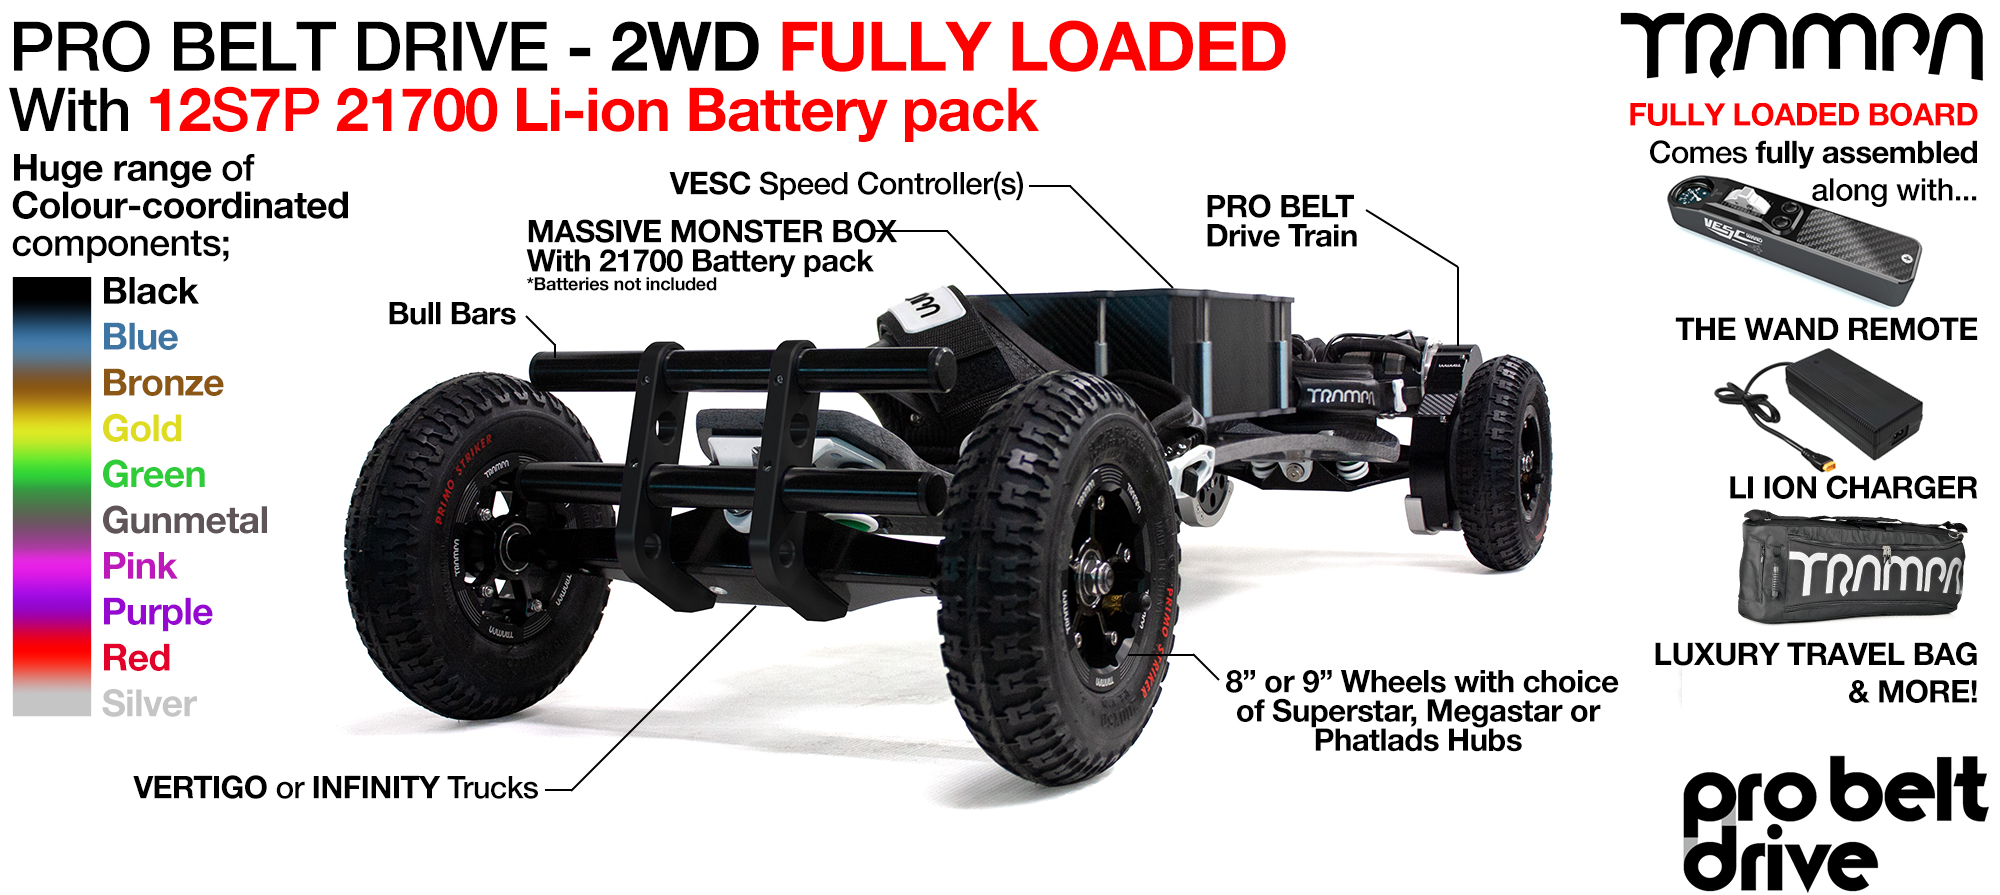 TRAMPA's 2WD 16mm PRO Belt Drive BigBoi FULLY LOADED Electric mountainboard with 21700 Cell Pack, 12s 12A Charger, The WAND, Bull Bars, sent FULY ASSEMBLED In a Luxury Travel Bag all as standard!! 